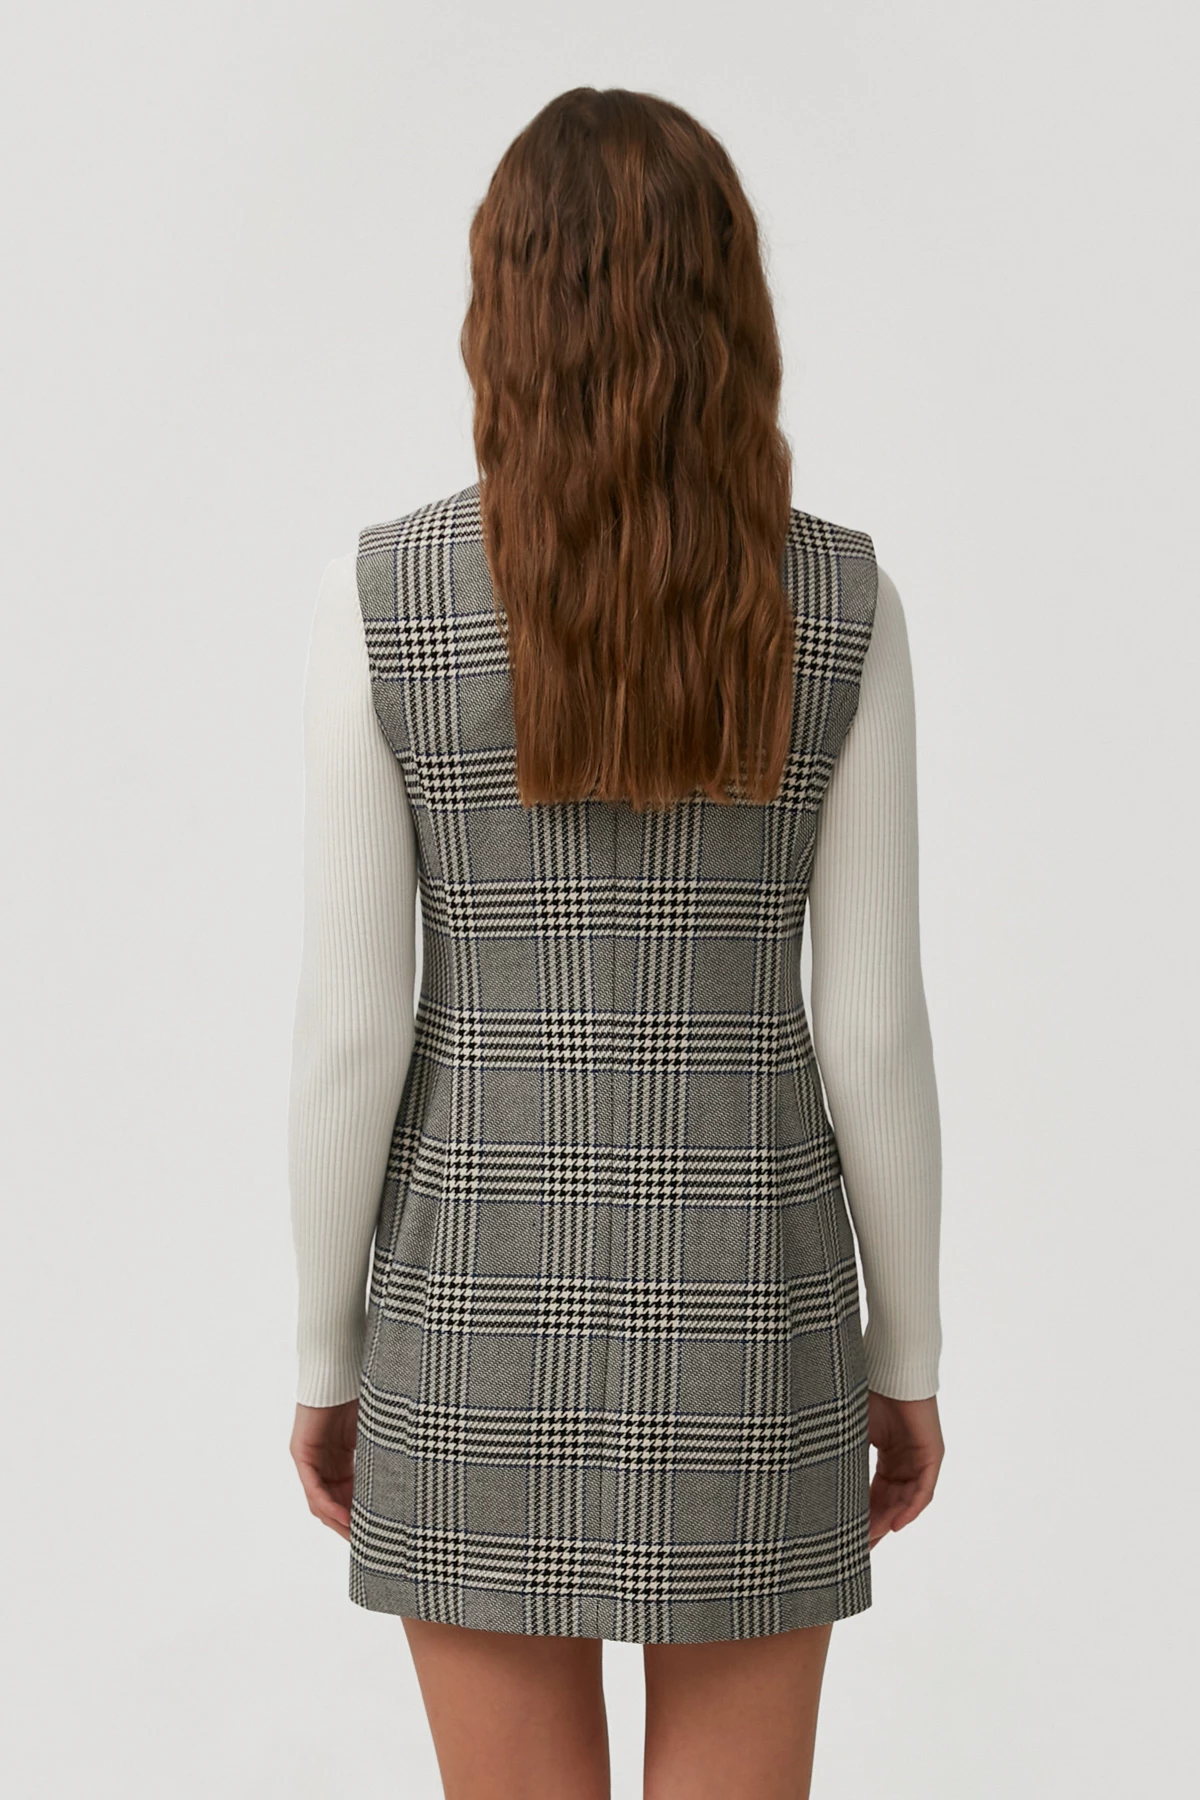 Double-breasted vest-dress made of plaid suiting fabric, photo 6